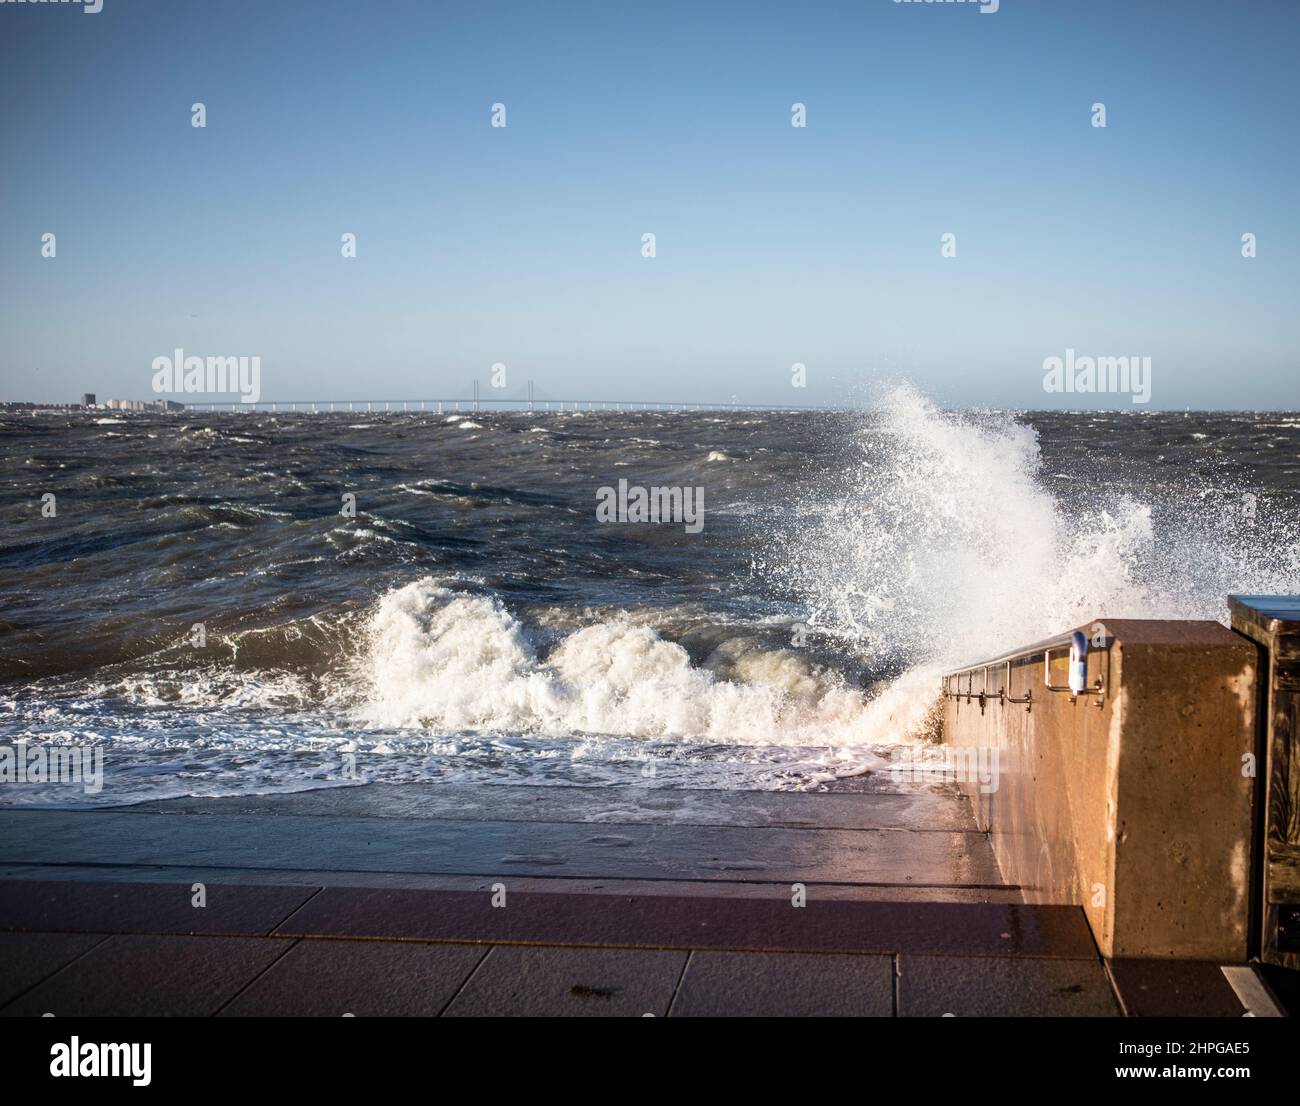 WESTERN HARBOR, MALMOE, SWEDEN - JANUARY 30, 2022: The storm named 'Malik' hits the southwest of Sweden stirring up huge waves flooding the area of We Stock Photo